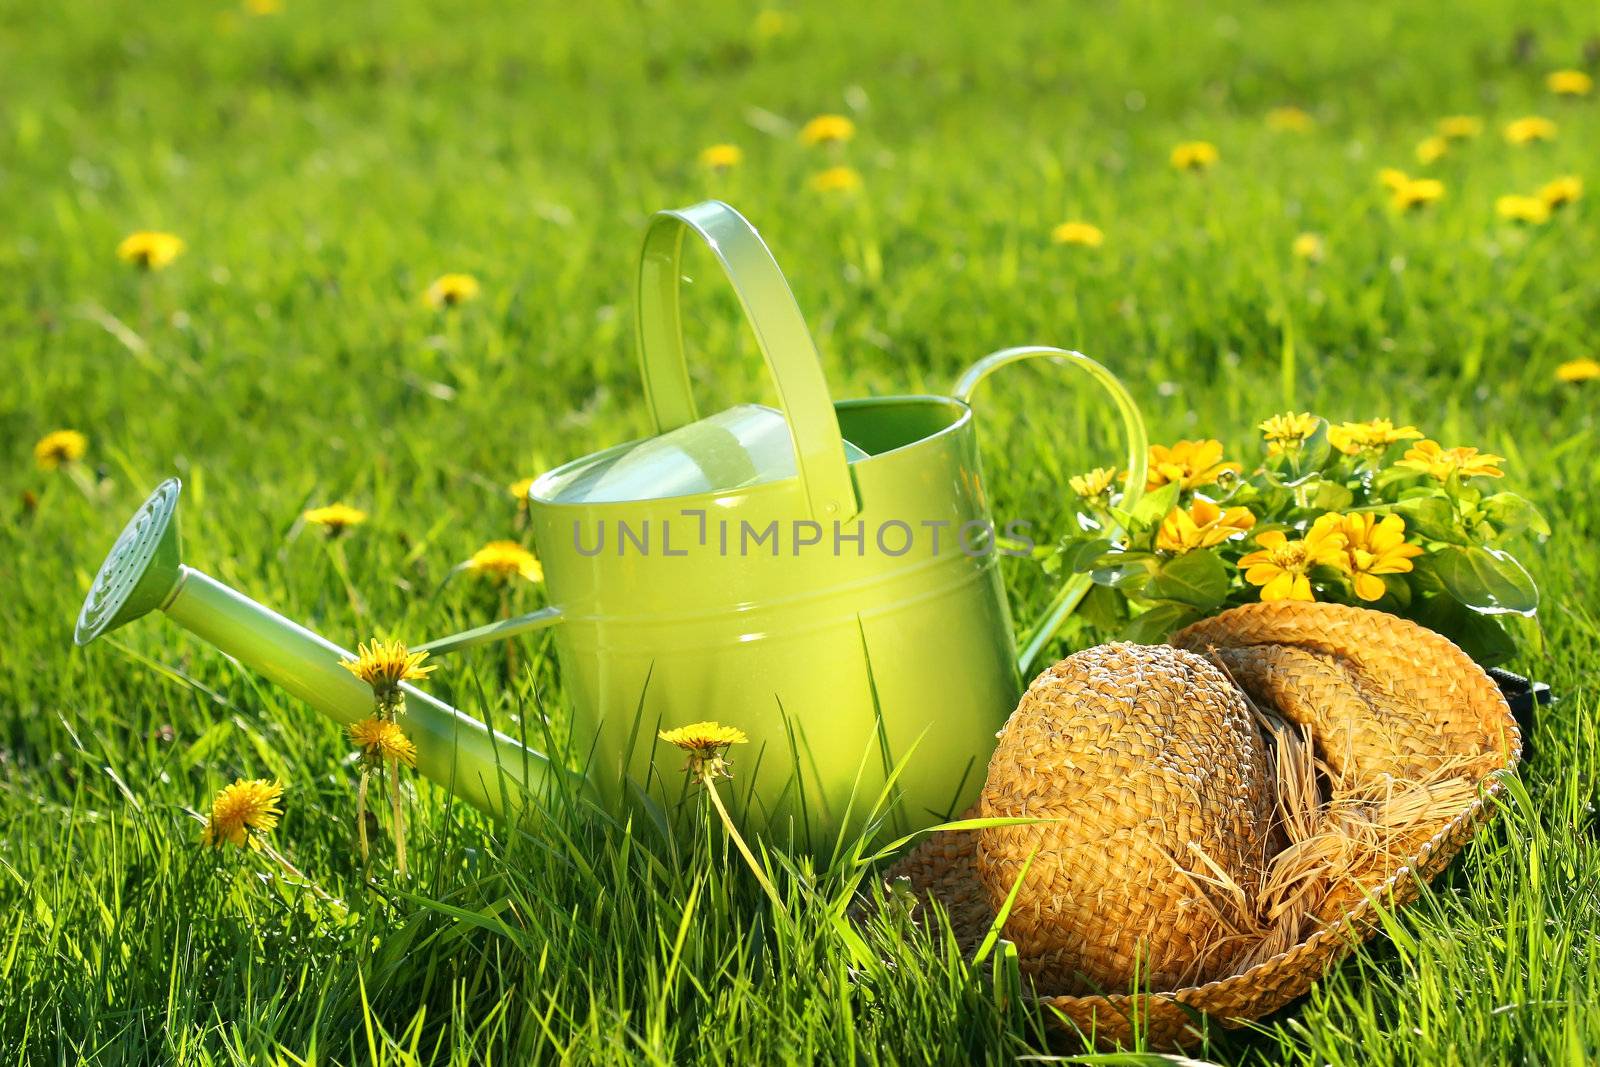 Watering can in the grass with old straw hat